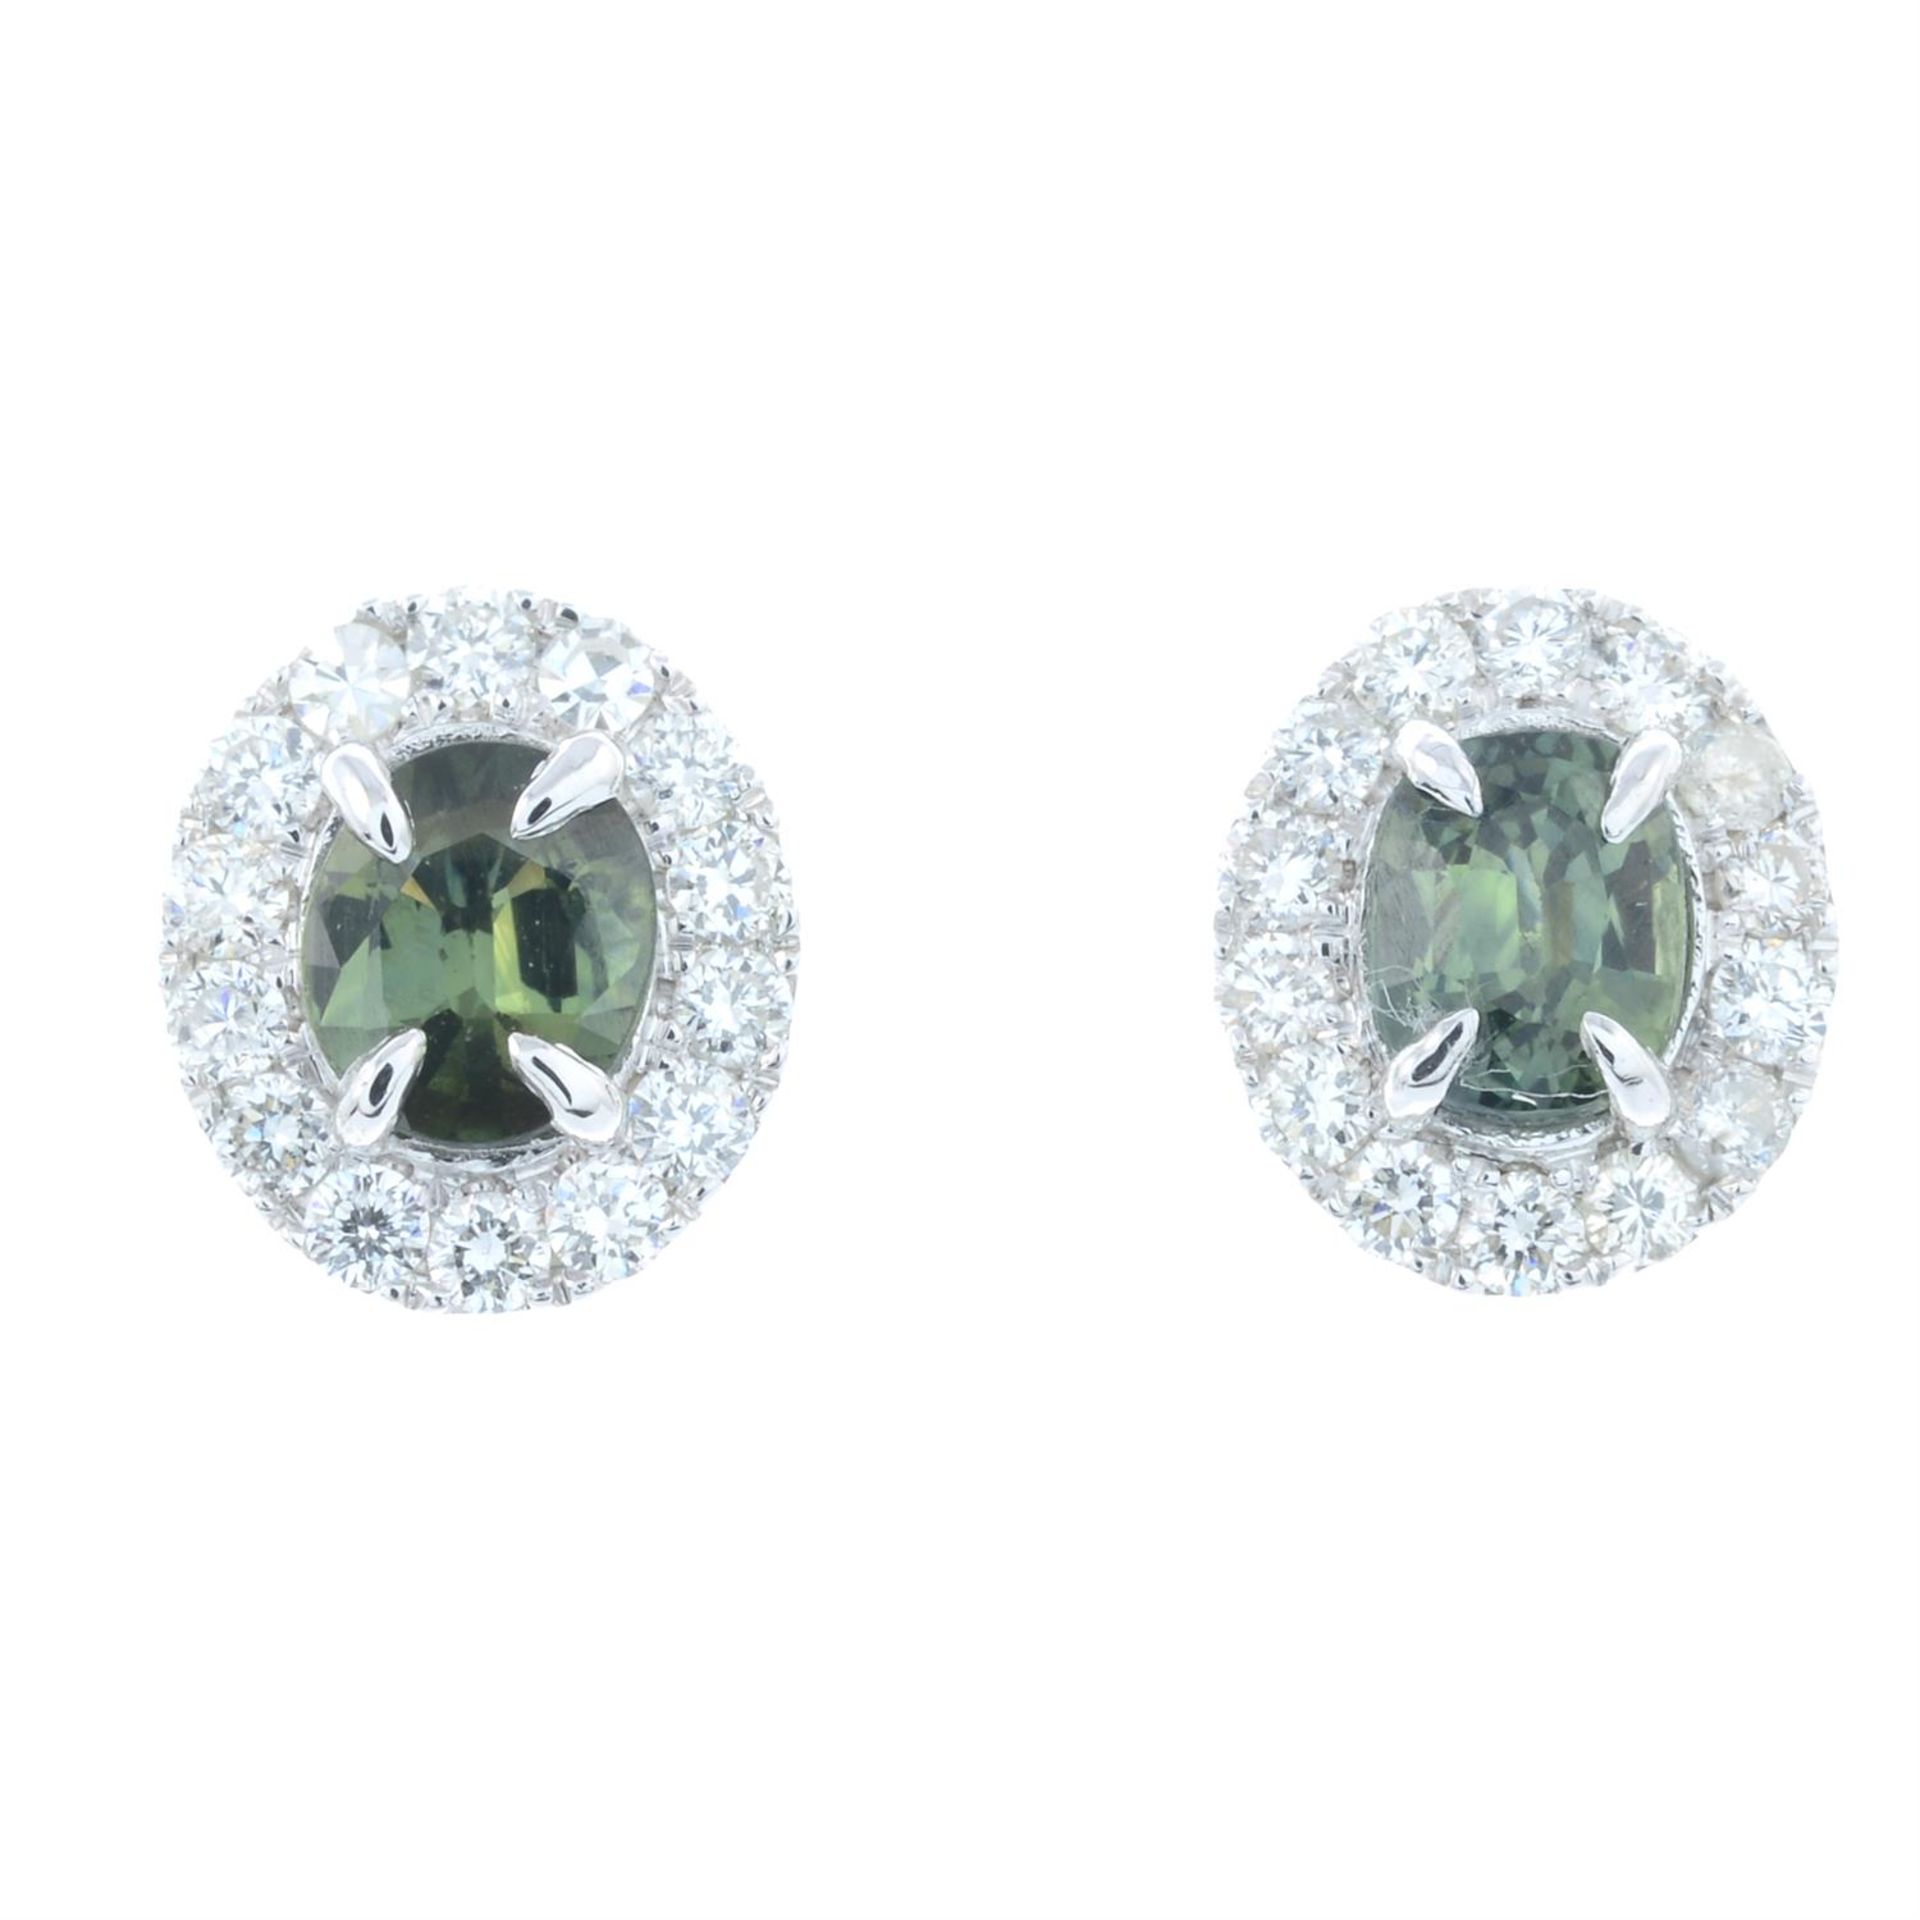 A pair of green tourmaline and diamond cluster earrings.